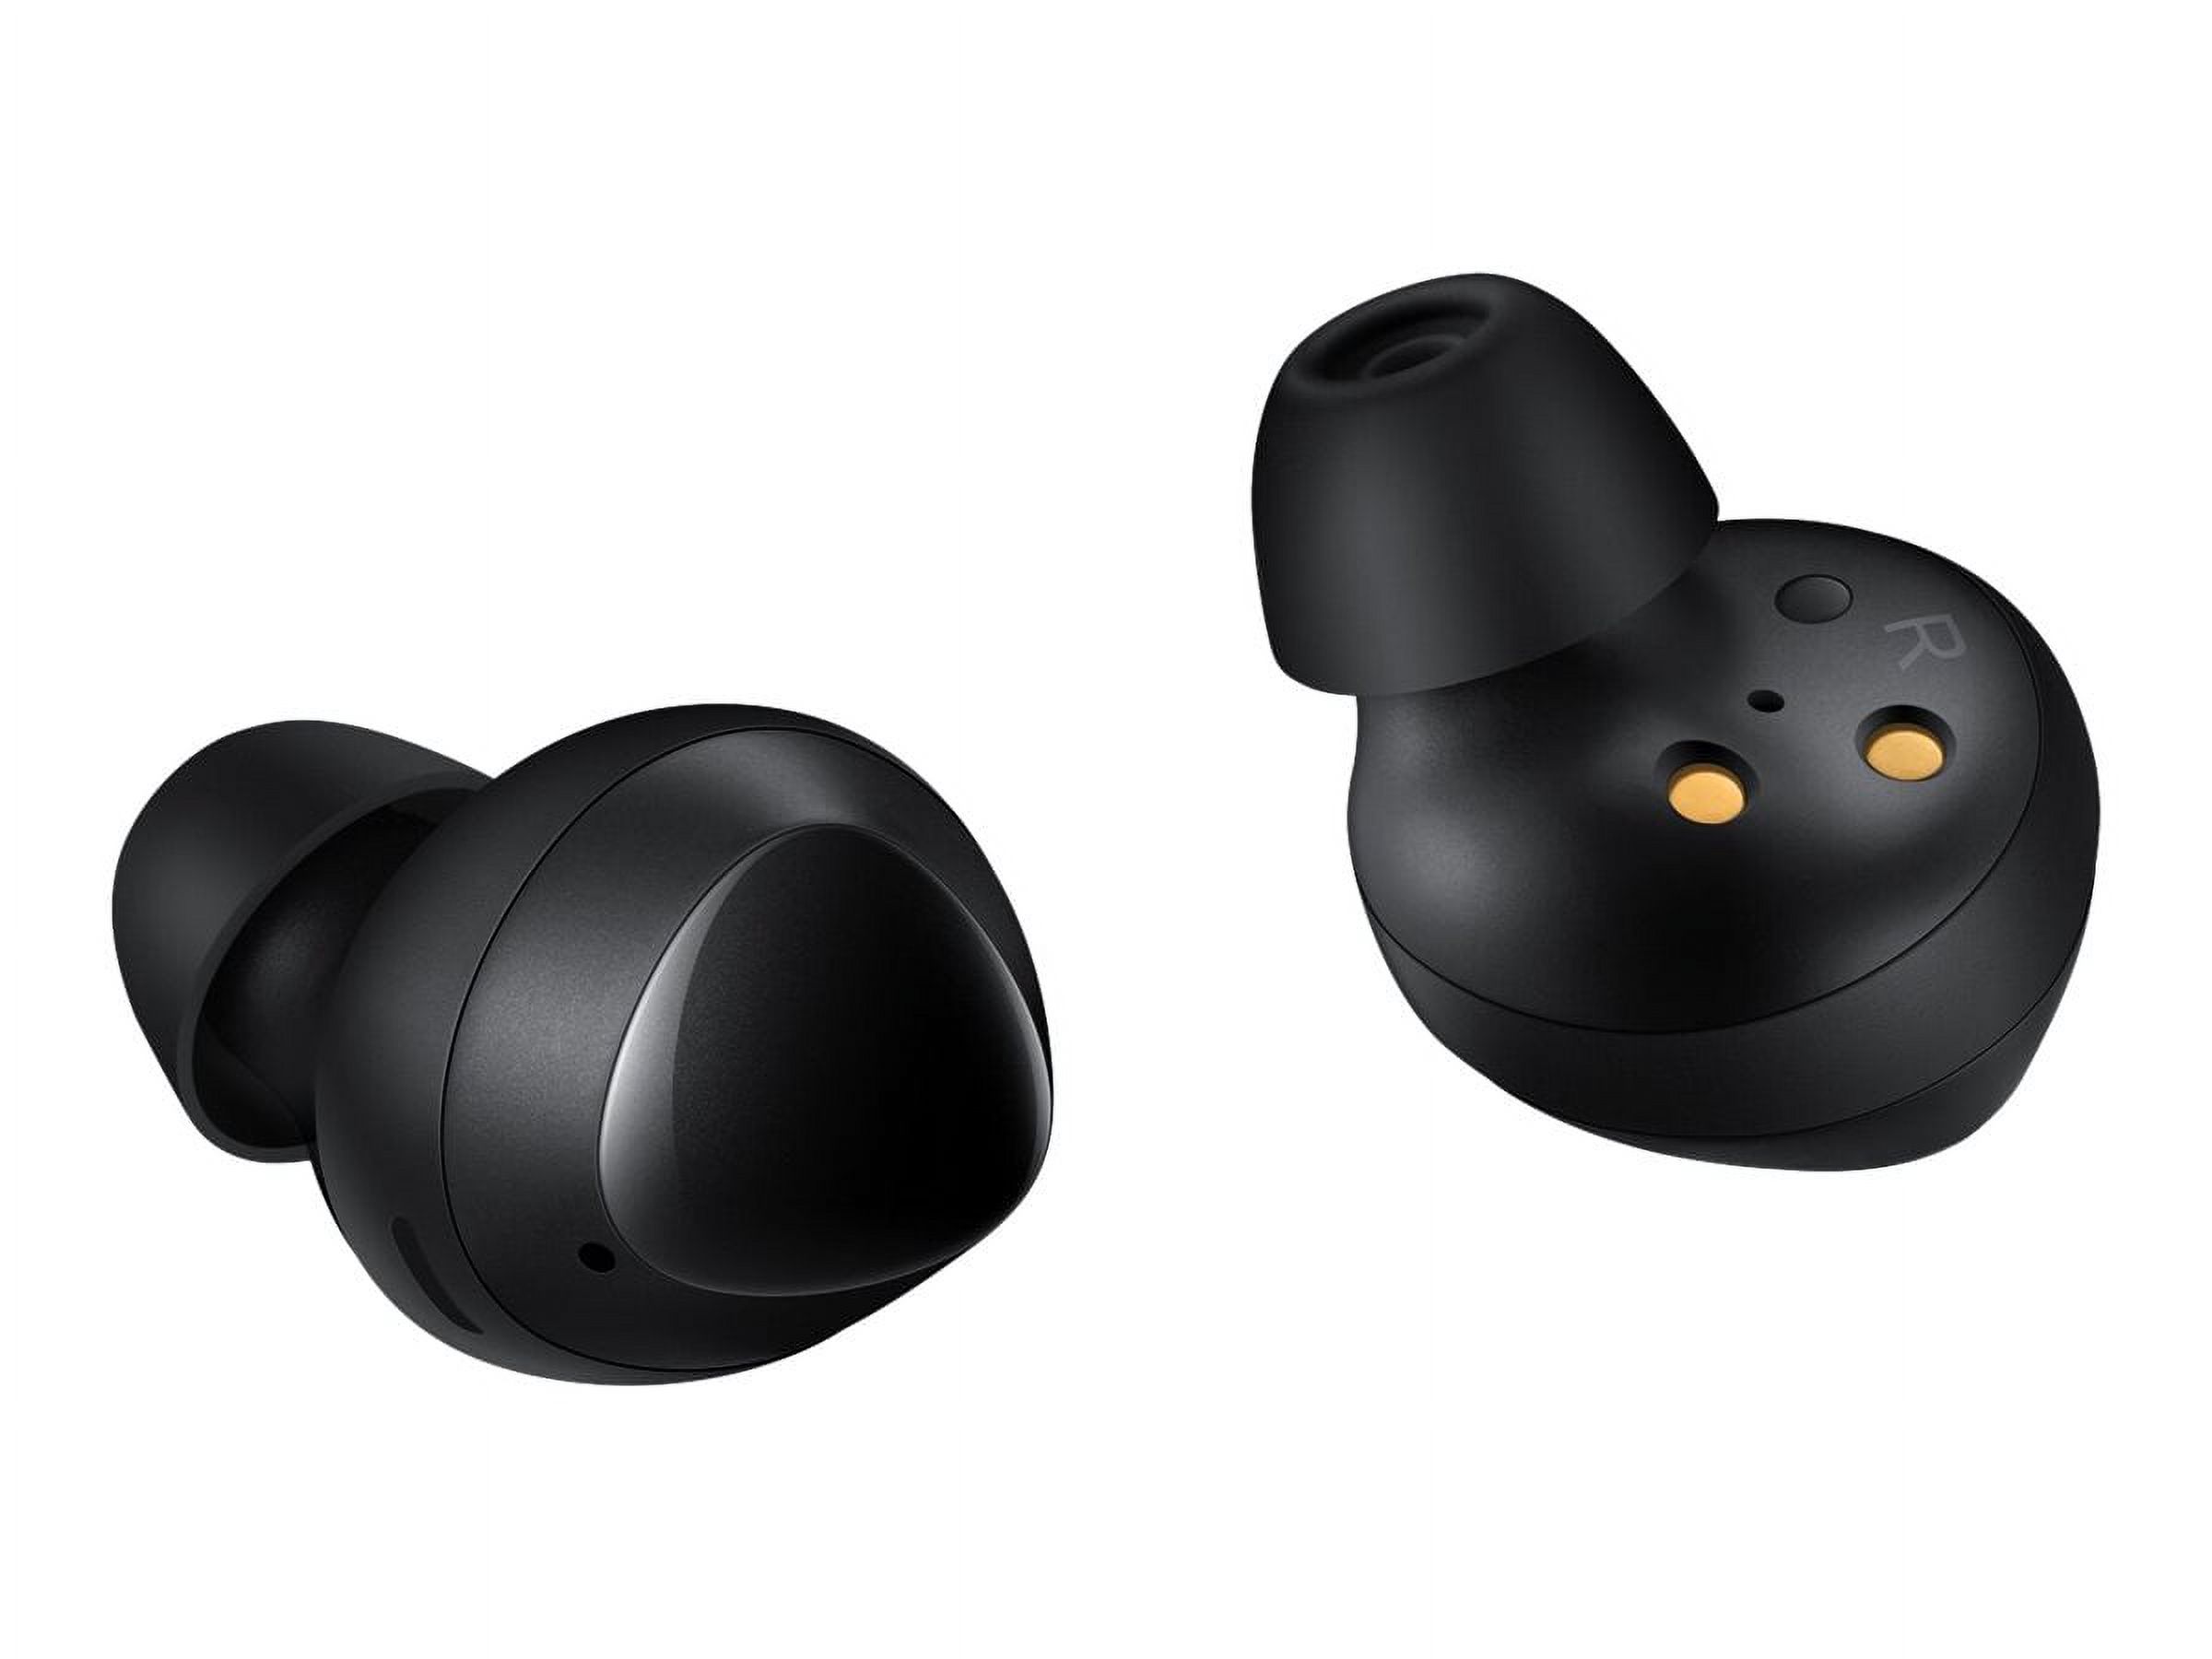 SAMSUNG Galaxy Buds, Black (Charging Case Included) - image 4 of 10